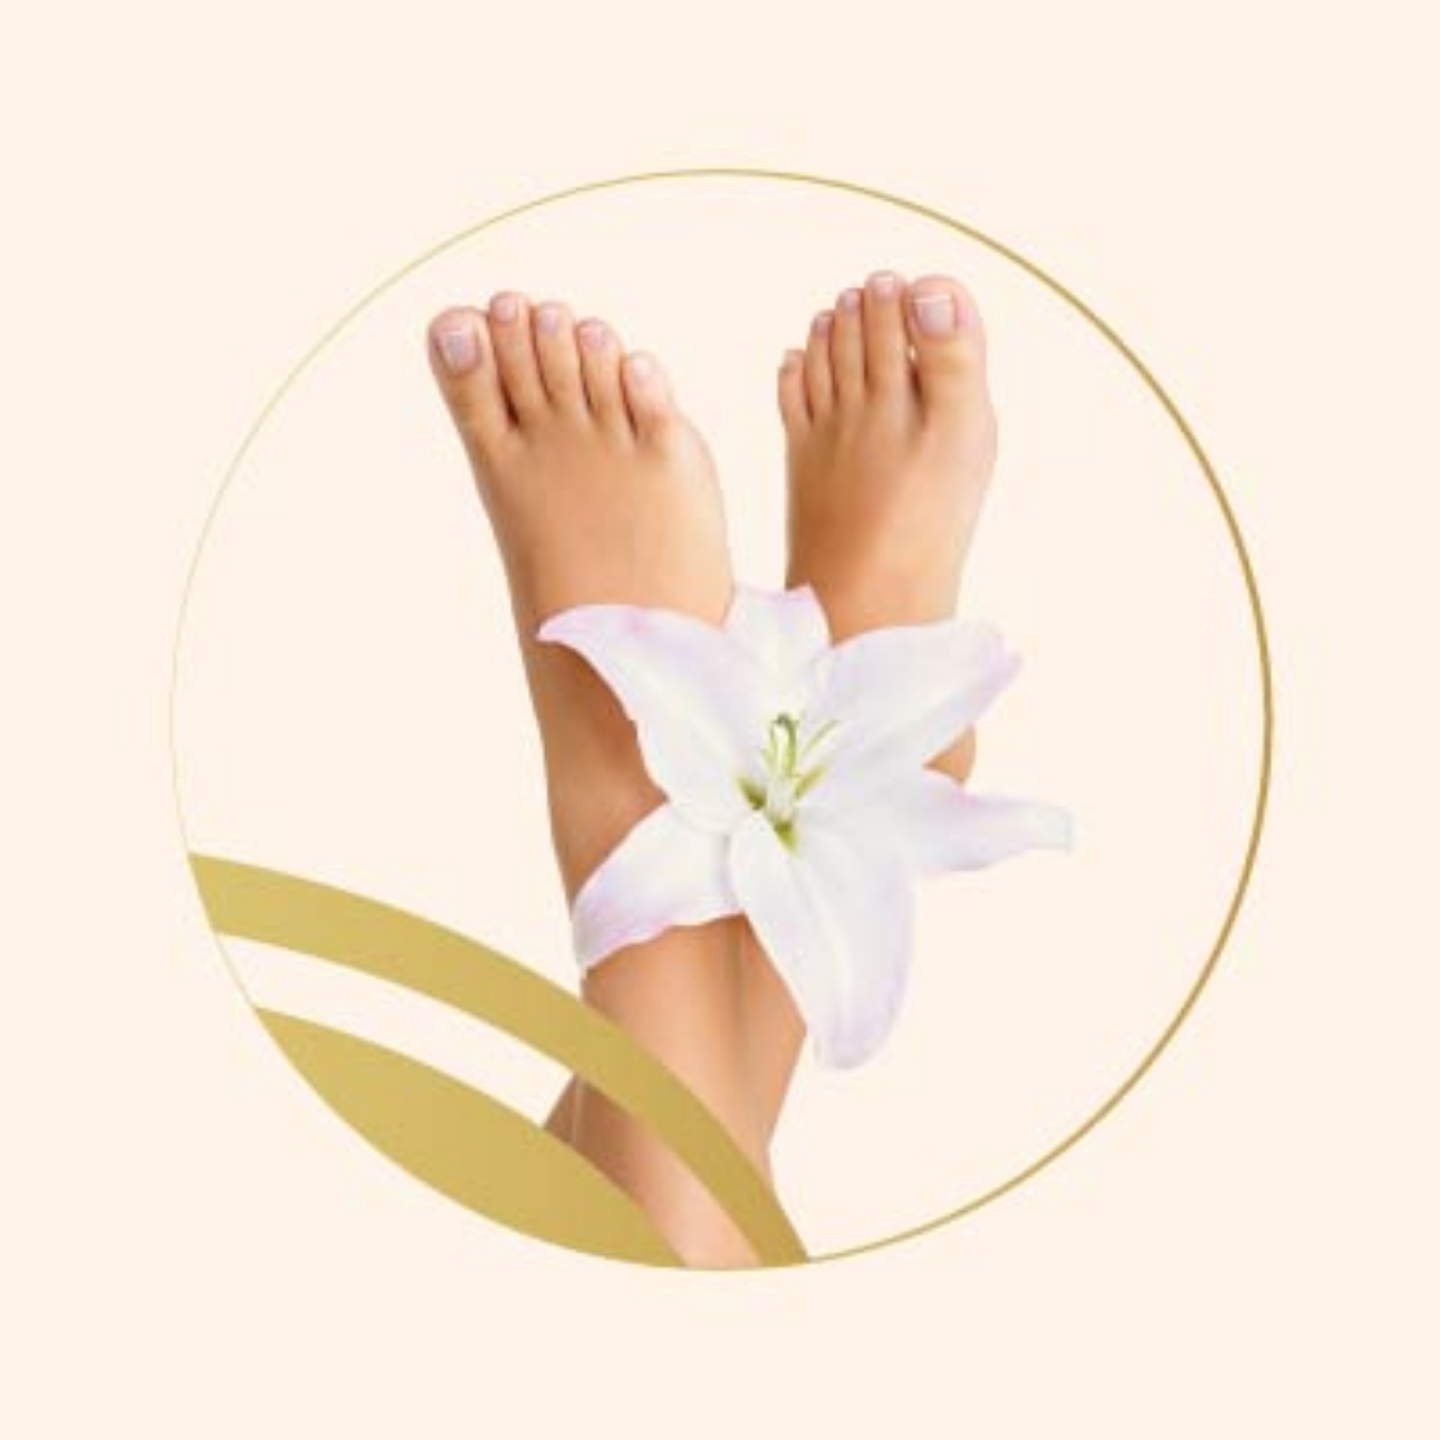 Picture for category Foot care